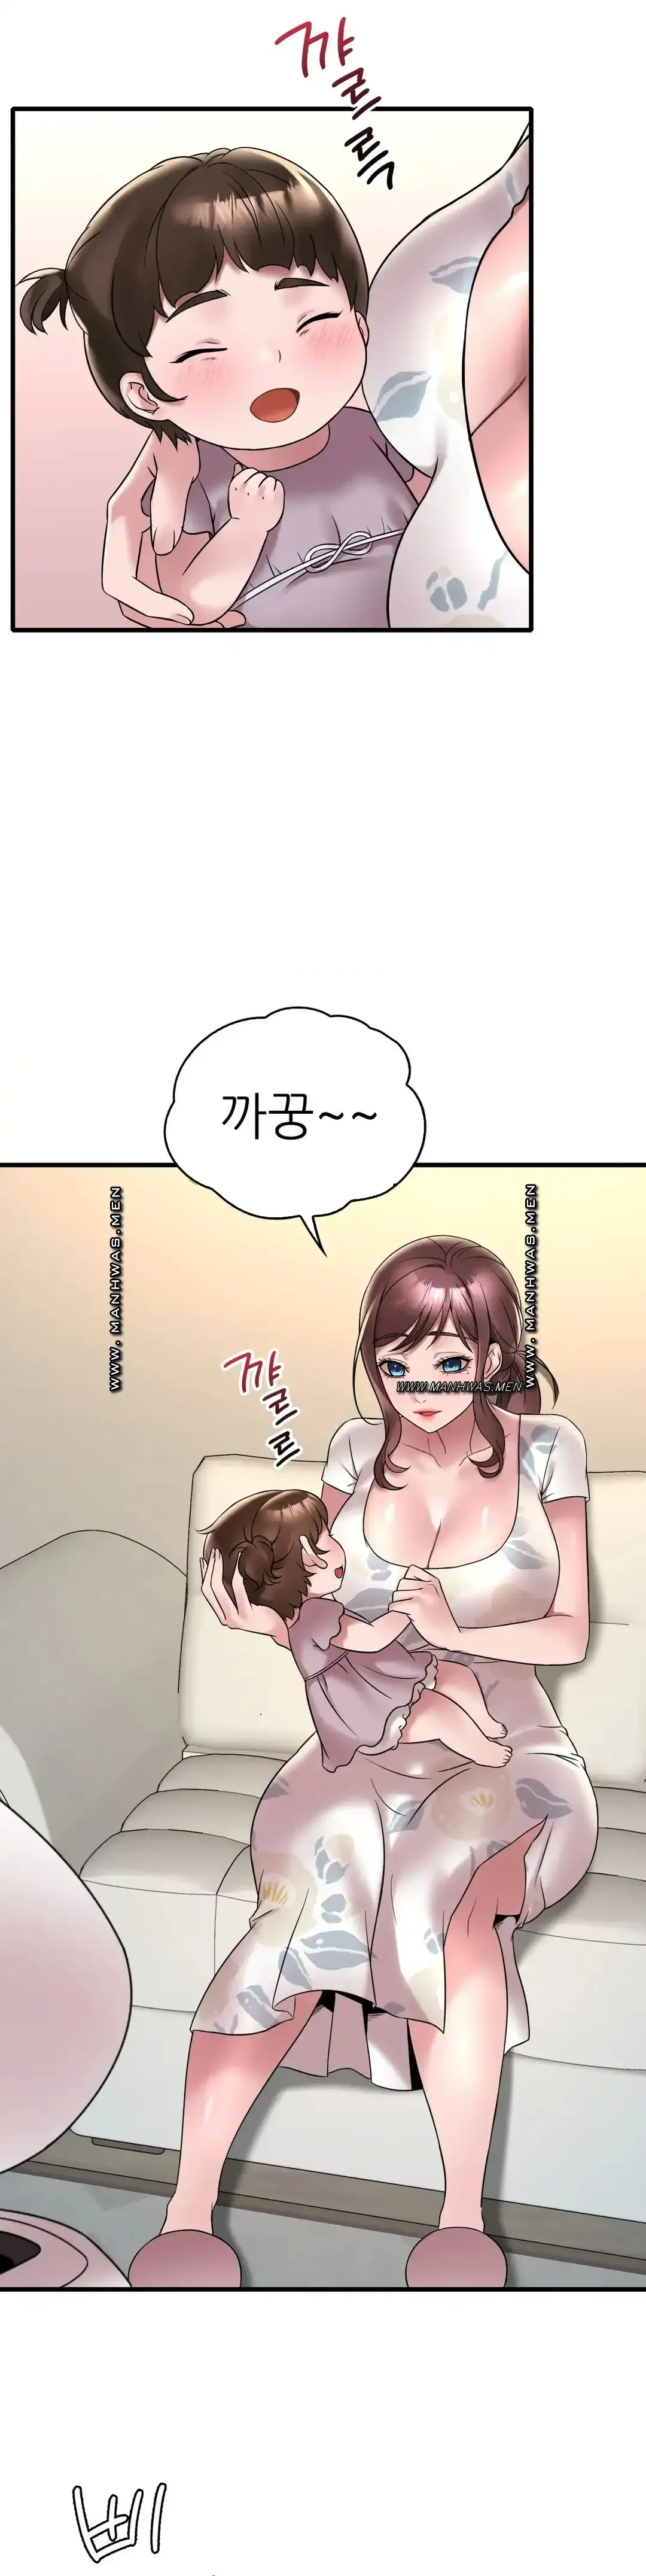 she-wants-to-get-drunk-raw-chap-33-31